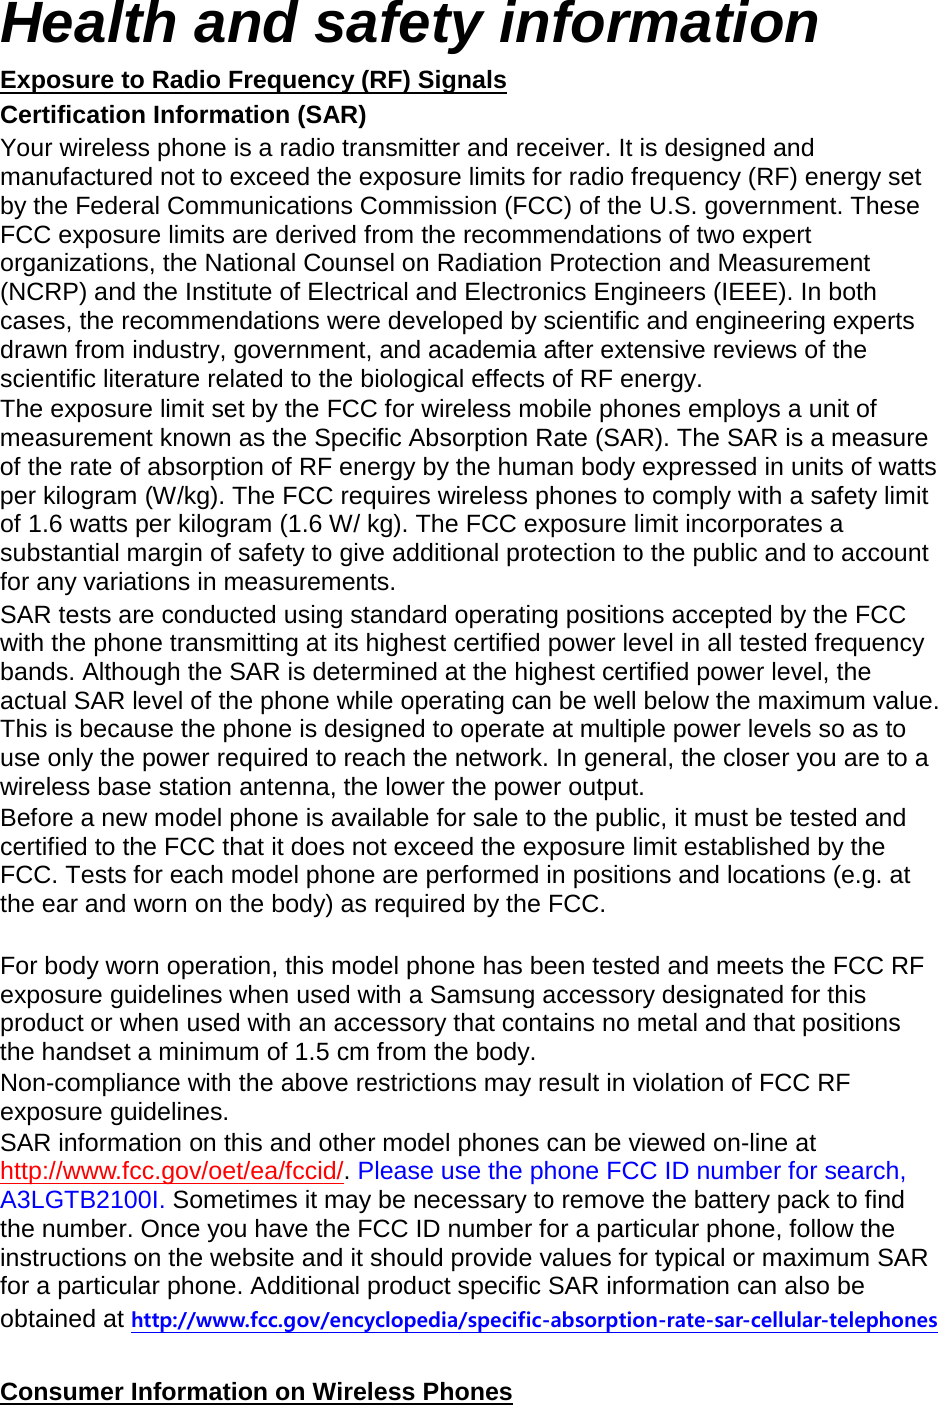 Health and safety information Exposure to Radio Frequency (RF) Signals Certification Information (SAR) Your wireless phone is a radio transmitter and receiver. It is designed and manufactured not to exceed the exposure limits for radio frequency (RF) energy set by the Federal Communications Commission (FCC) of the U.S. government. These FCC exposure limits are derived from the recommendations of two expert organizations, the National Counsel on Radiation Protection and Measurement (NCRP) and the Institute of Electrical and Electronics Engineers (IEEE). In both cases, the recommendations were developed by scientific and engineering experts drawn from industry, government, and academia after extensive reviews of the scientific literature related to the biological effects of RF energy. The exposure limit set by the FCC for wireless mobile phones employs a unit of measurement known as the Specific Absorption Rate (SAR). The SAR is a measure of the rate of absorption of RF energy by the human body expressed in units of watts per kilogram (W/kg). The FCC requires wireless phones to comply with a safety limit of 1.6 watts per kilogram (1.6 W/ kg). The FCC exposure limit incorporates a substantial margin of safety to give additional protection to the public and to account for any variations in measurements. SAR tests are conducted using standard operating positions accepted by the FCC with the phone transmitting at its highest certified power level in all tested frequency bands. Although the SAR is determined at the highest certified power level, the actual SAR level of the phone while operating can be well below the maximum value. This is because the phone is designed to operate at multiple power levels so as to use only the power required to reach the network. In general, the closer you are to a wireless base station antenna, the lower the power output. Before a new model phone is available for sale to the public, it must be tested and certified to the FCC that it does not exceed the exposure limit established by the FCC. Tests for each model phone are performed in positions and locations (e.g. at the ear and worn on the body) as required by the FCC.      For body worn operation, this model phone has been tested and meets the FCC RF exposure guidelines when used with a Samsung accessory designated for this product or when used with an accessory that contains no metal and that positions the handset a minimum of 1.5 cm from the body.   Non-compliance with the above restrictions may result in violation of FCC RF exposure guidelines. SAR information on this and other model phones can be viewed on-line at http://www.fcc.gov/oet/ea/fccid/. Please use the phone FCC ID number for search, A3LGTB2100I. Sometimes it may be necessary to remove the battery pack to find the number. Once you have the FCC ID number for a particular phone, follow the instructions on the website and it should provide values for typical or maximum SAR for a particular phone. Additional product specific SAR information can also be obtained at http://www.fcc.gov/encyclopedia/specific-absorption-rate-sar-cellular-telephones  Consumer Information on Wireless Phones 